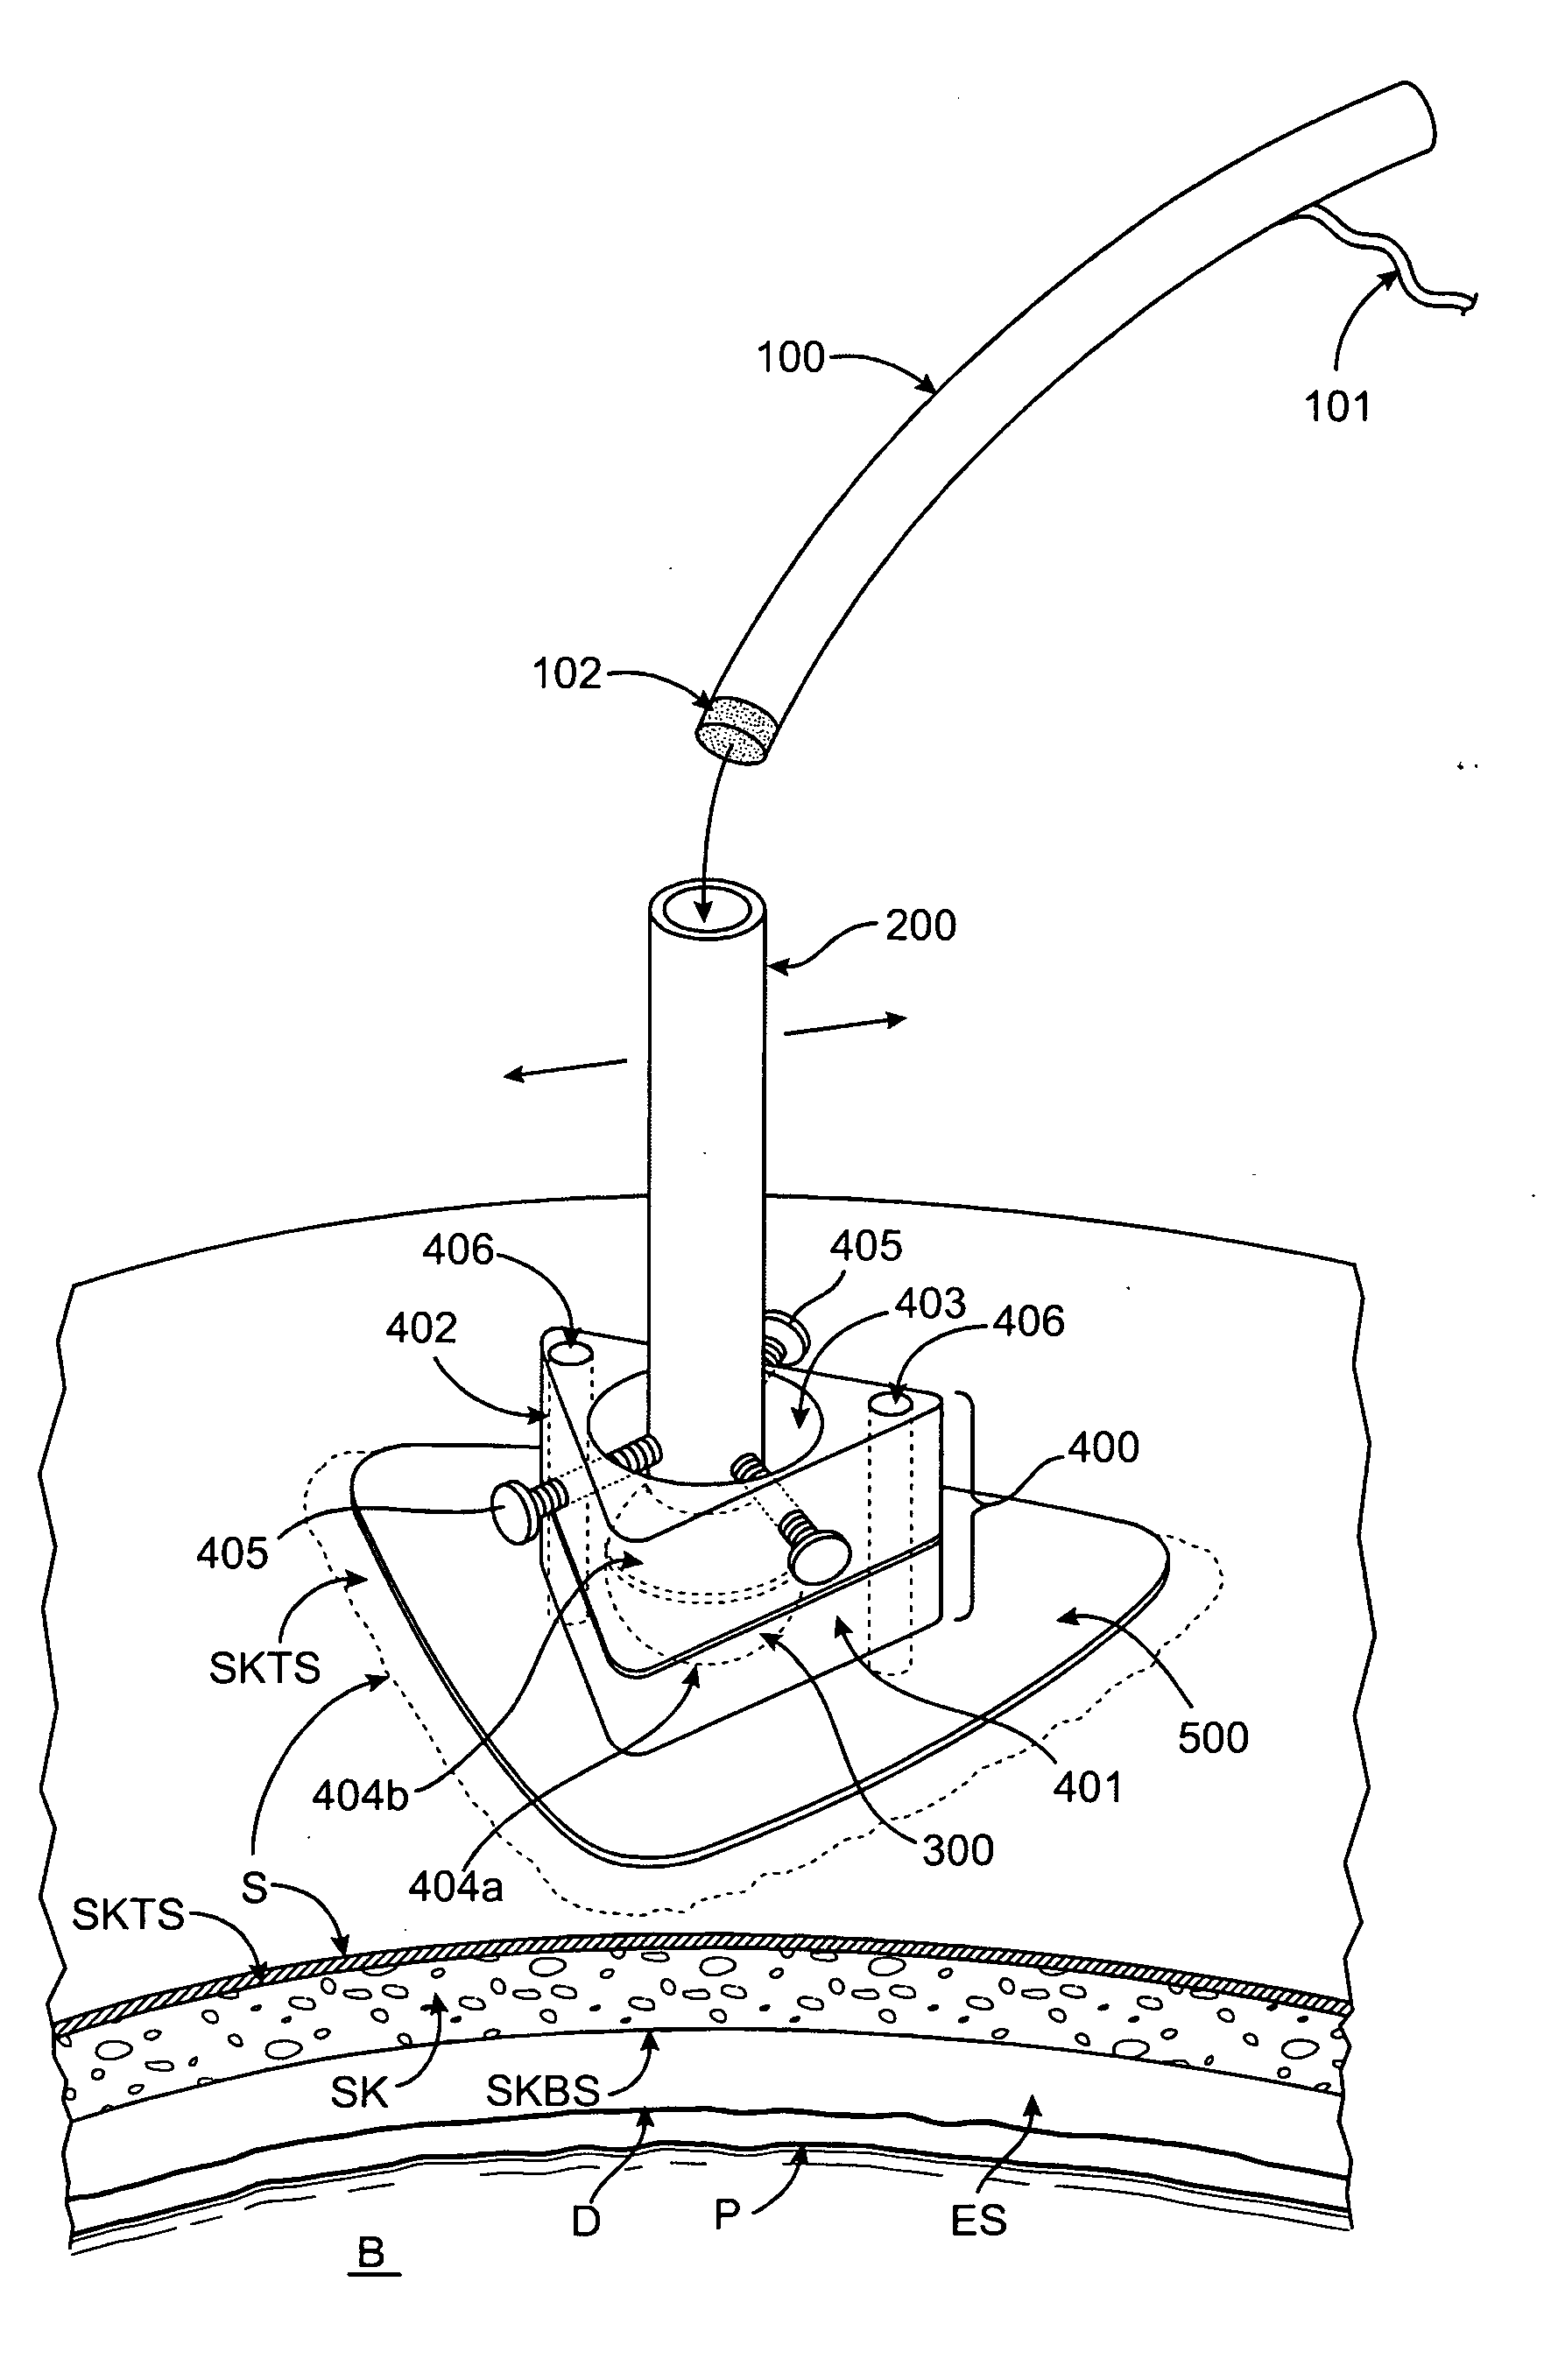 Methods and apparatus for intracranial ultrasound therapies